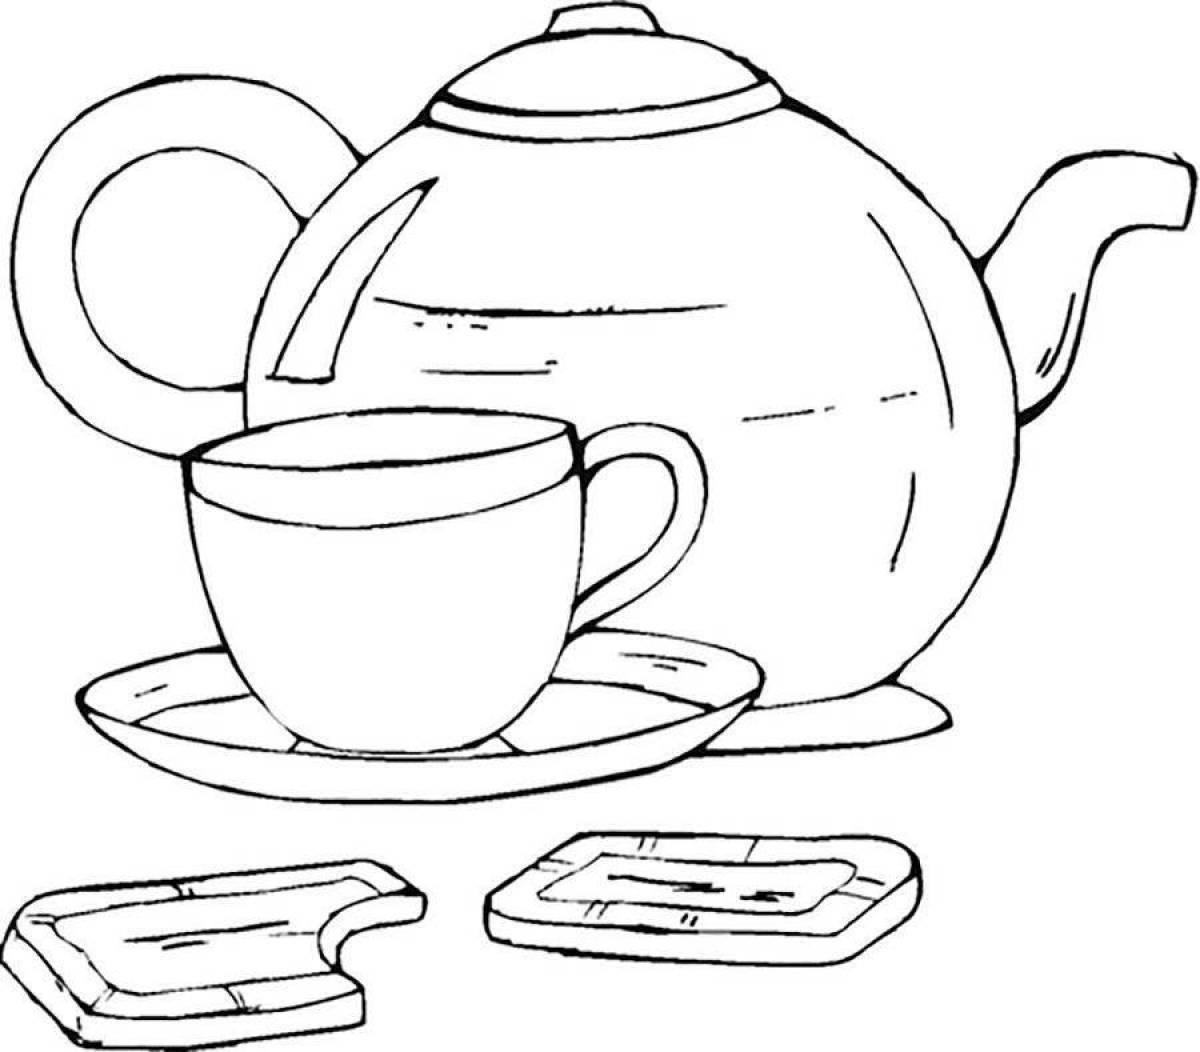 Great teapot coloring book for babies